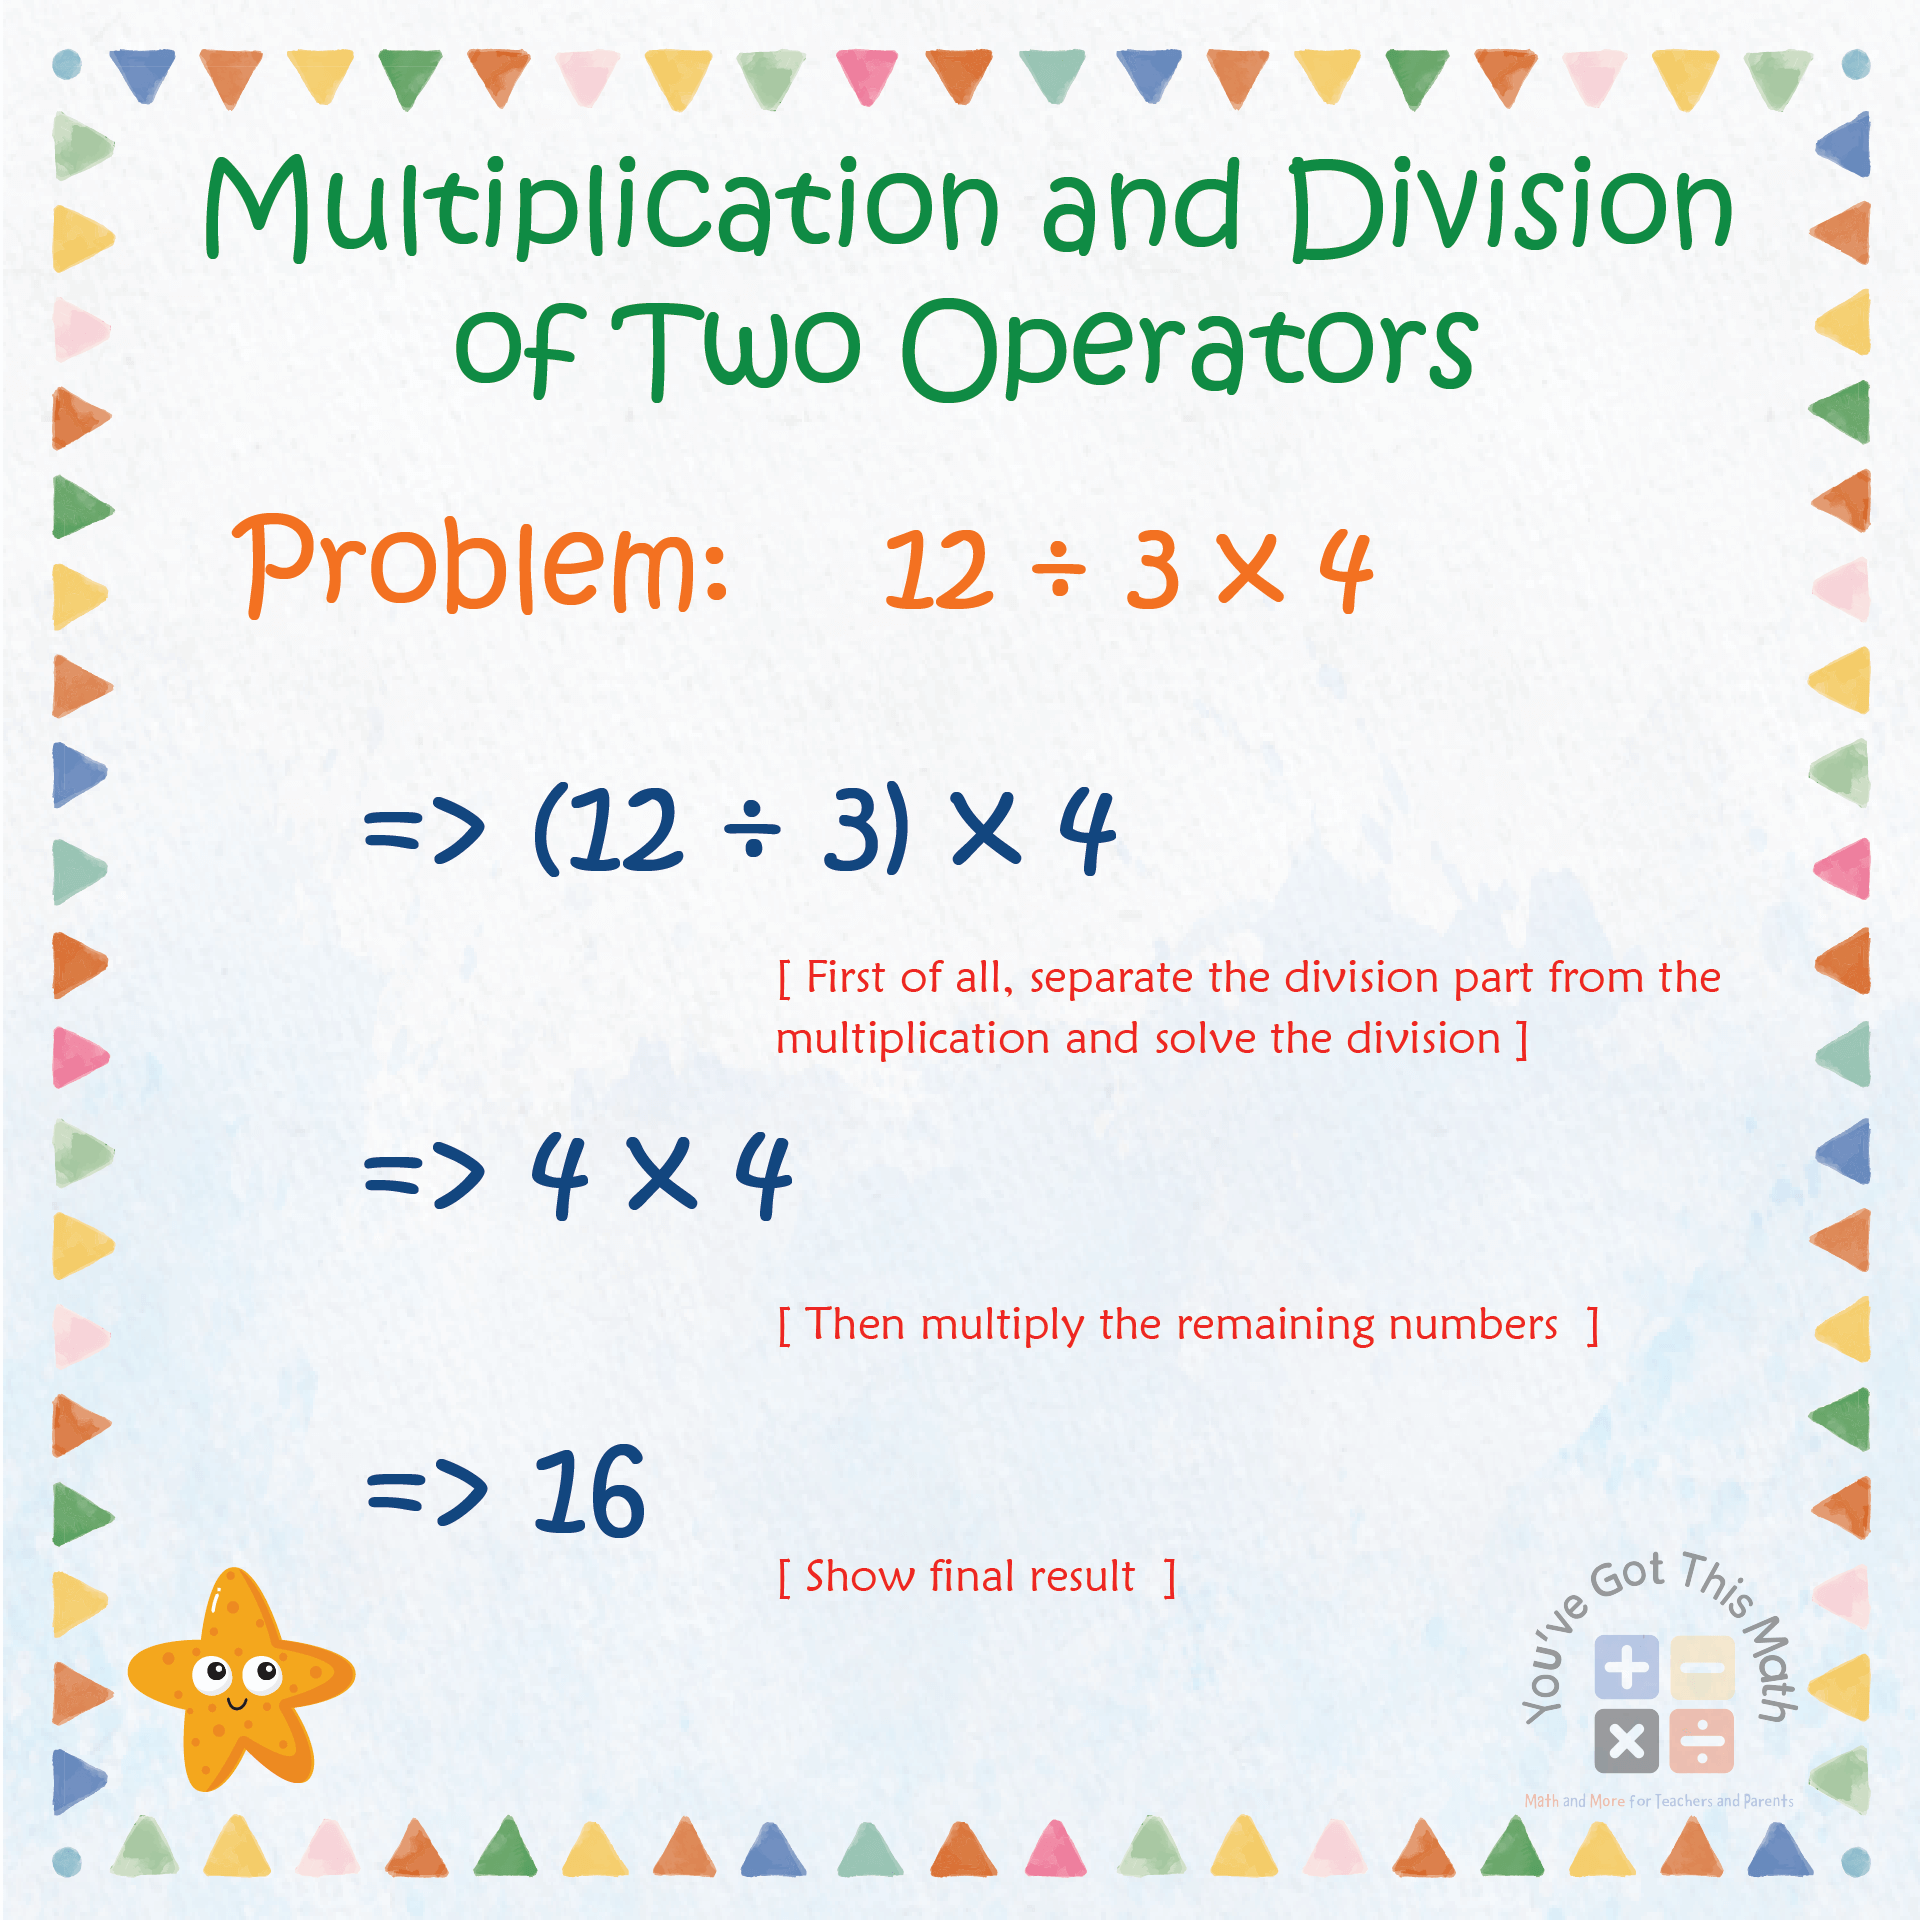 Explaining Multiplication and Division with Two Operators